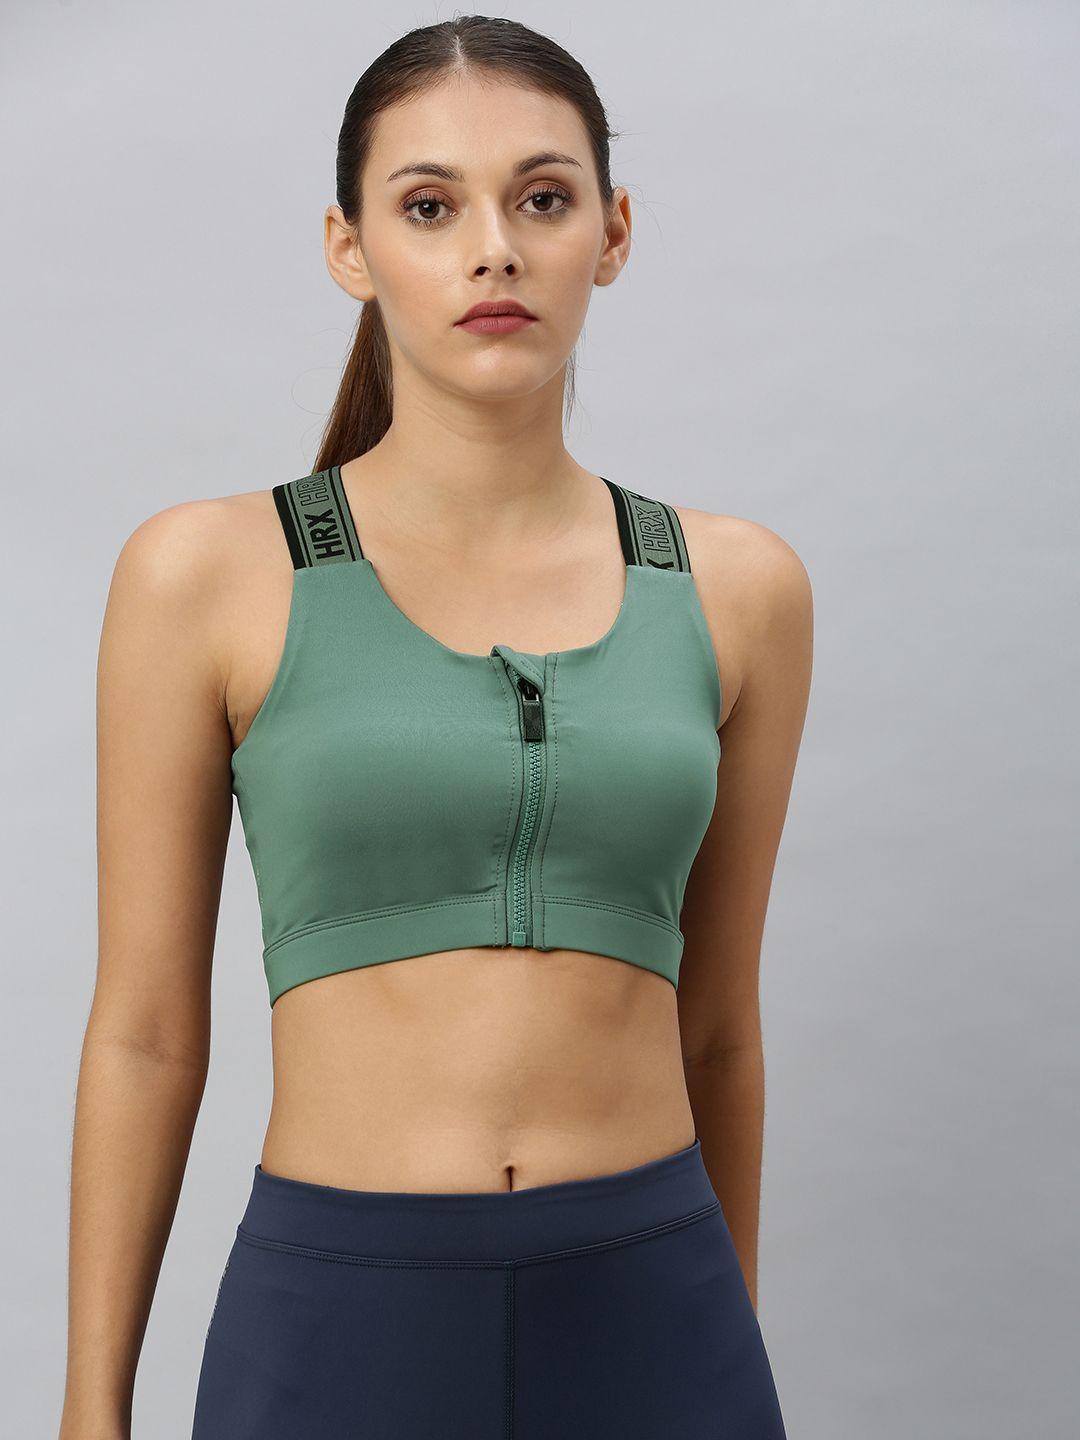 hrx by hrithik roshan green solid non-wired rapid dry training sports bra wkt-1433-c